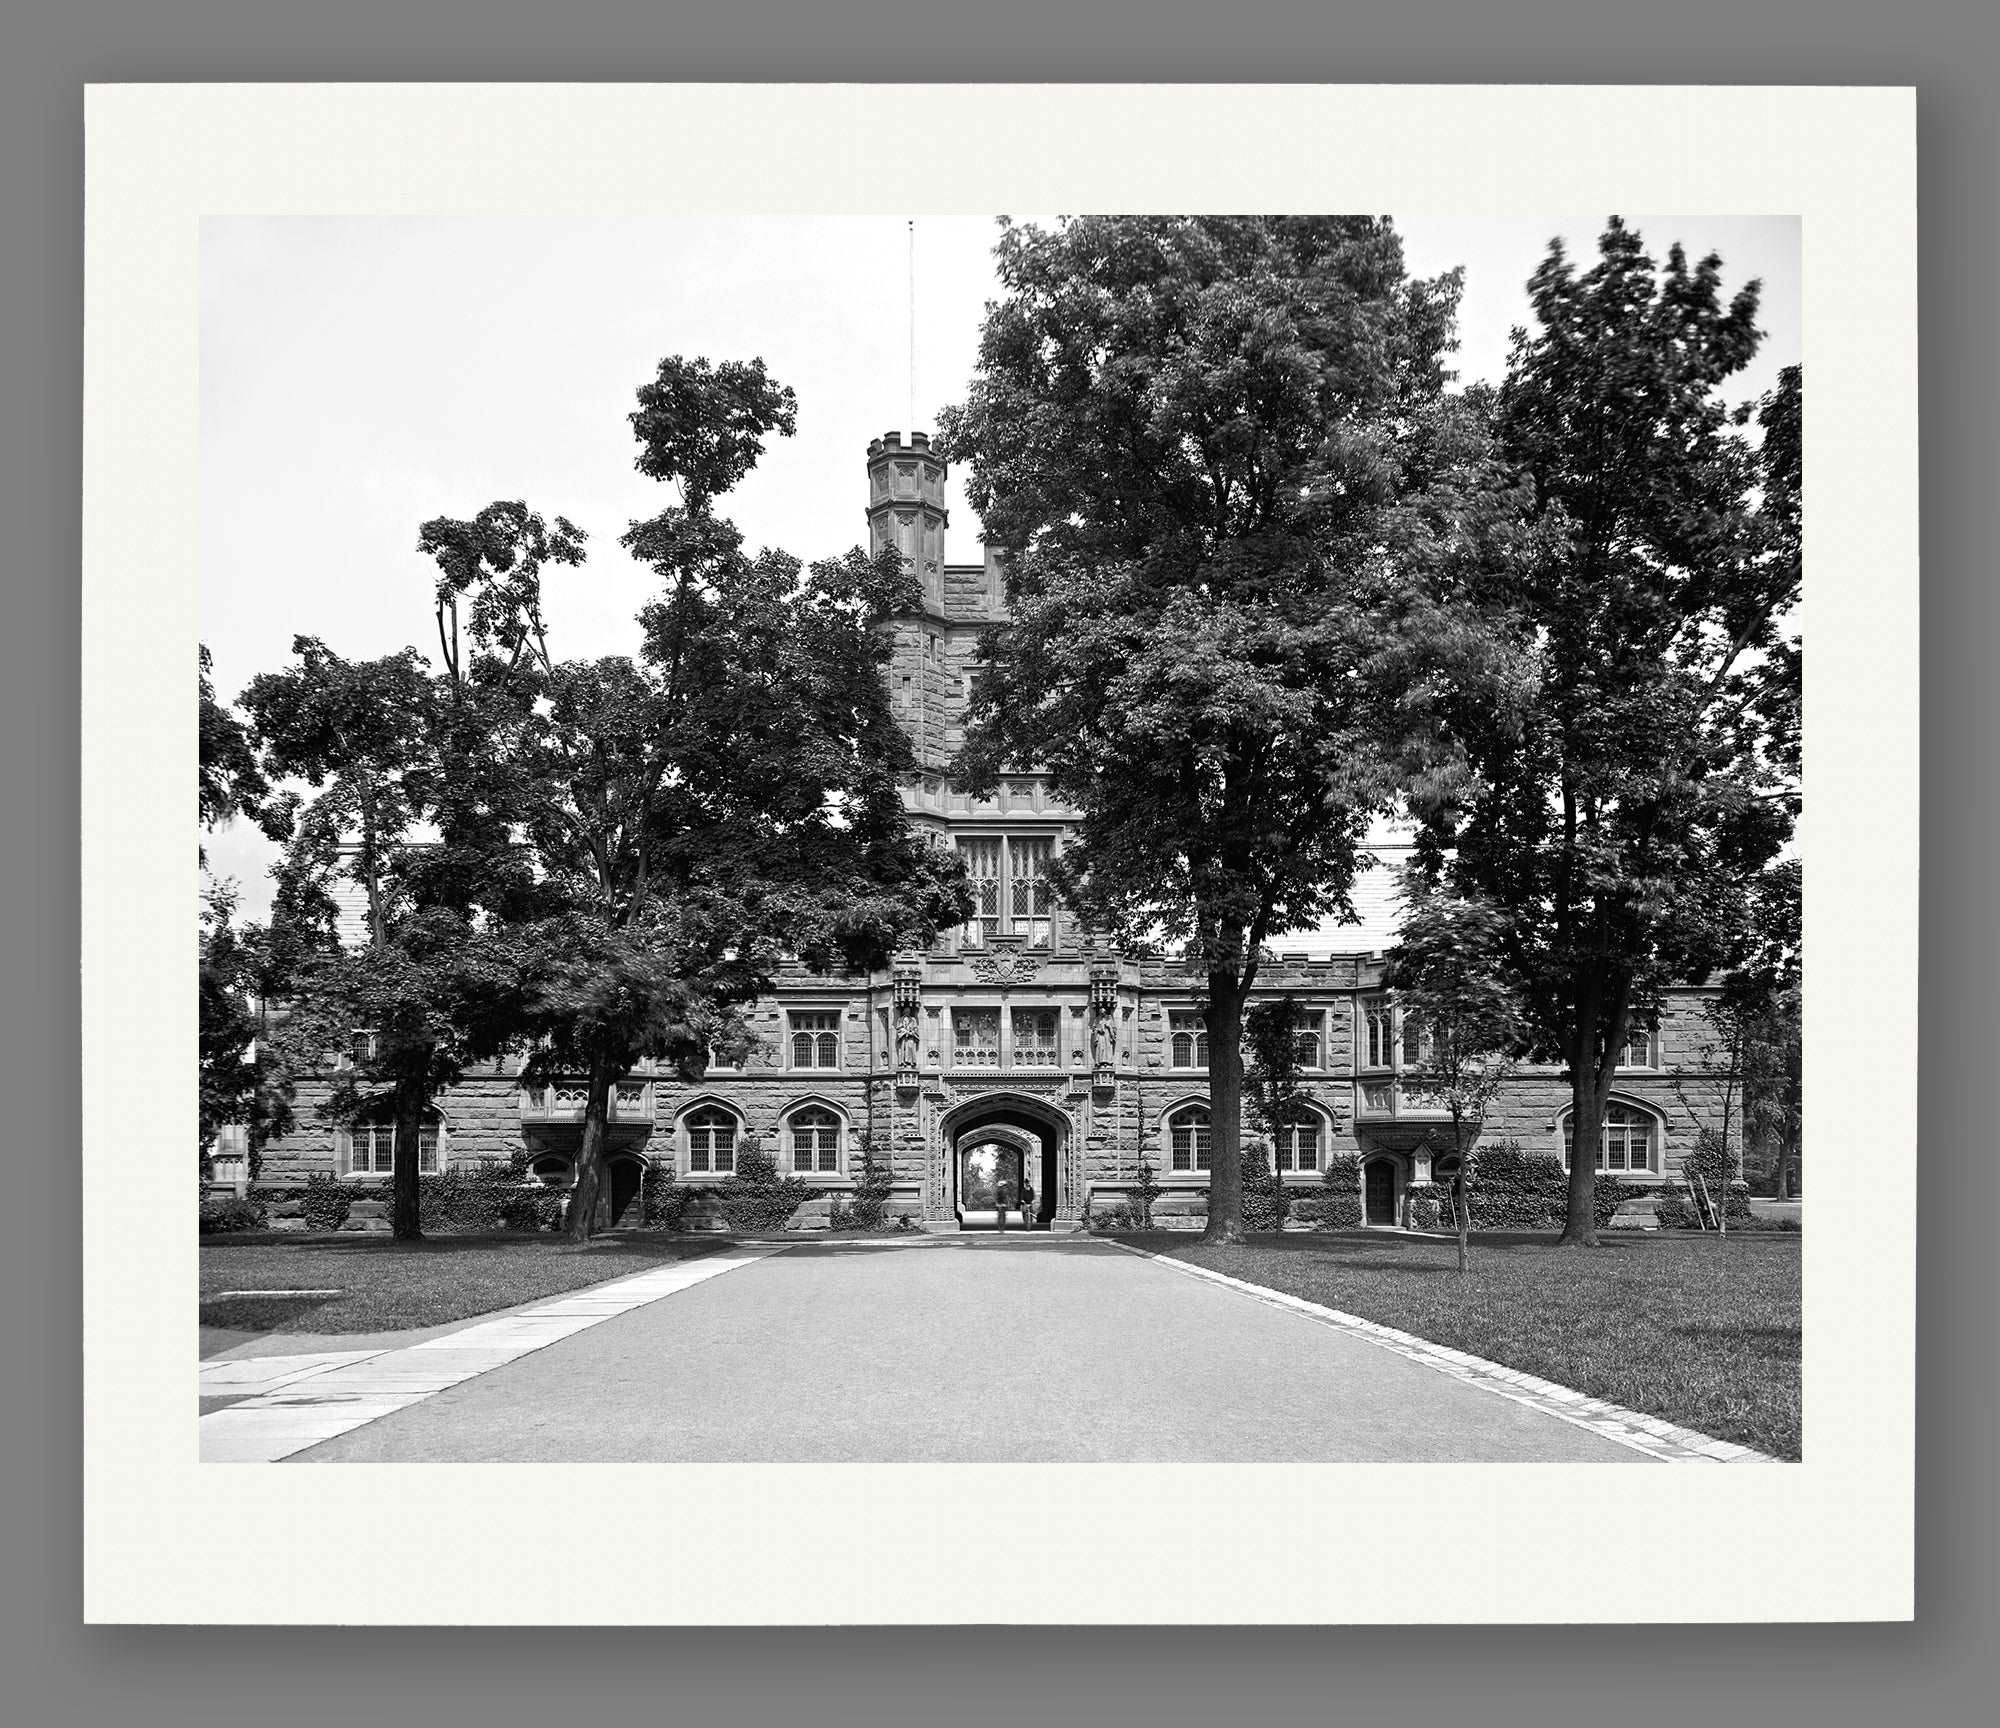 A paper print of a vintage photograph of the Library at Princeton University